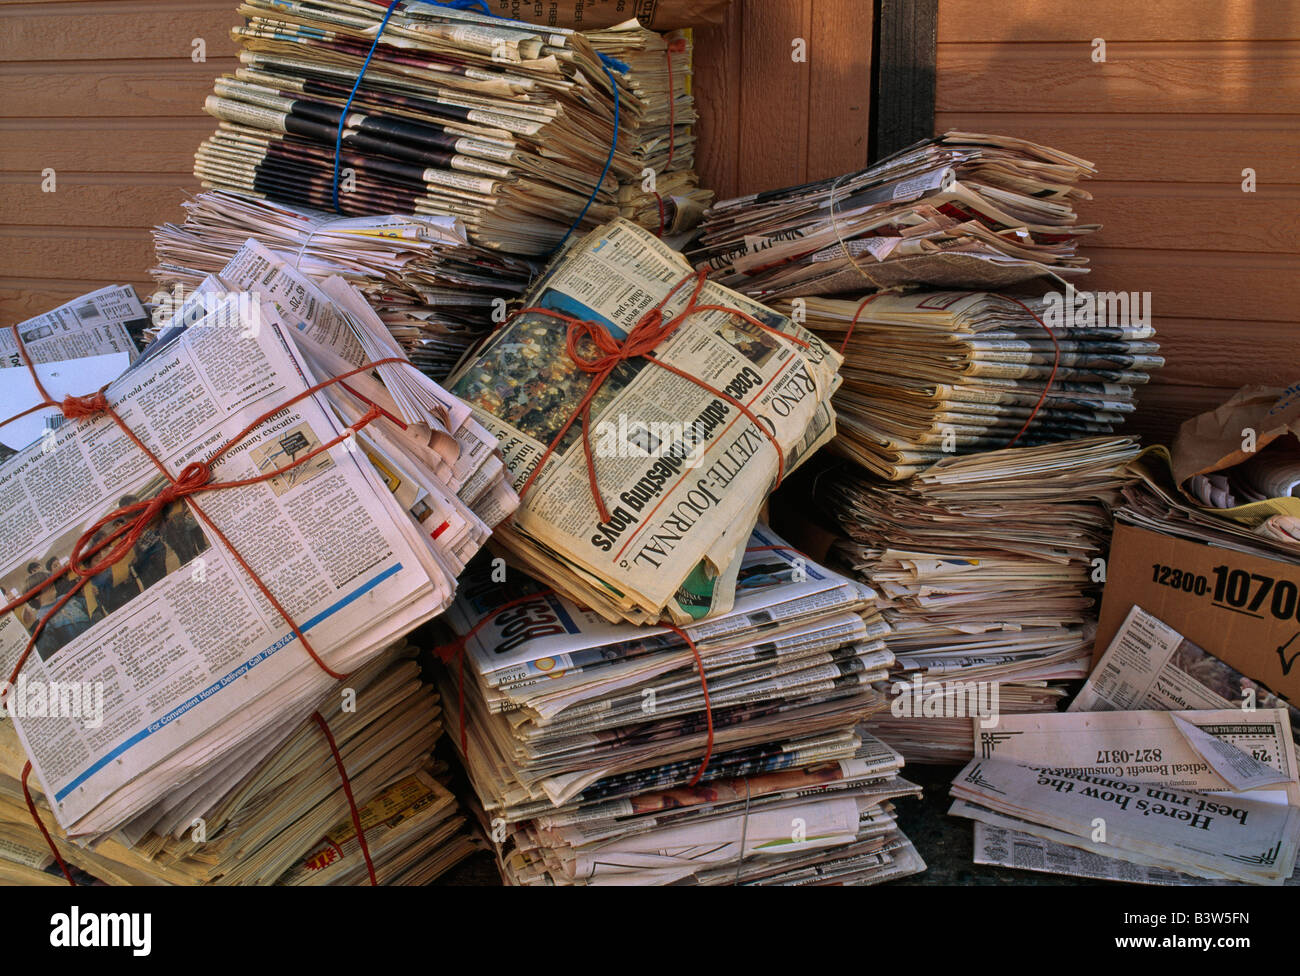 Newspaper bundled for recycling, United States Stock Photo